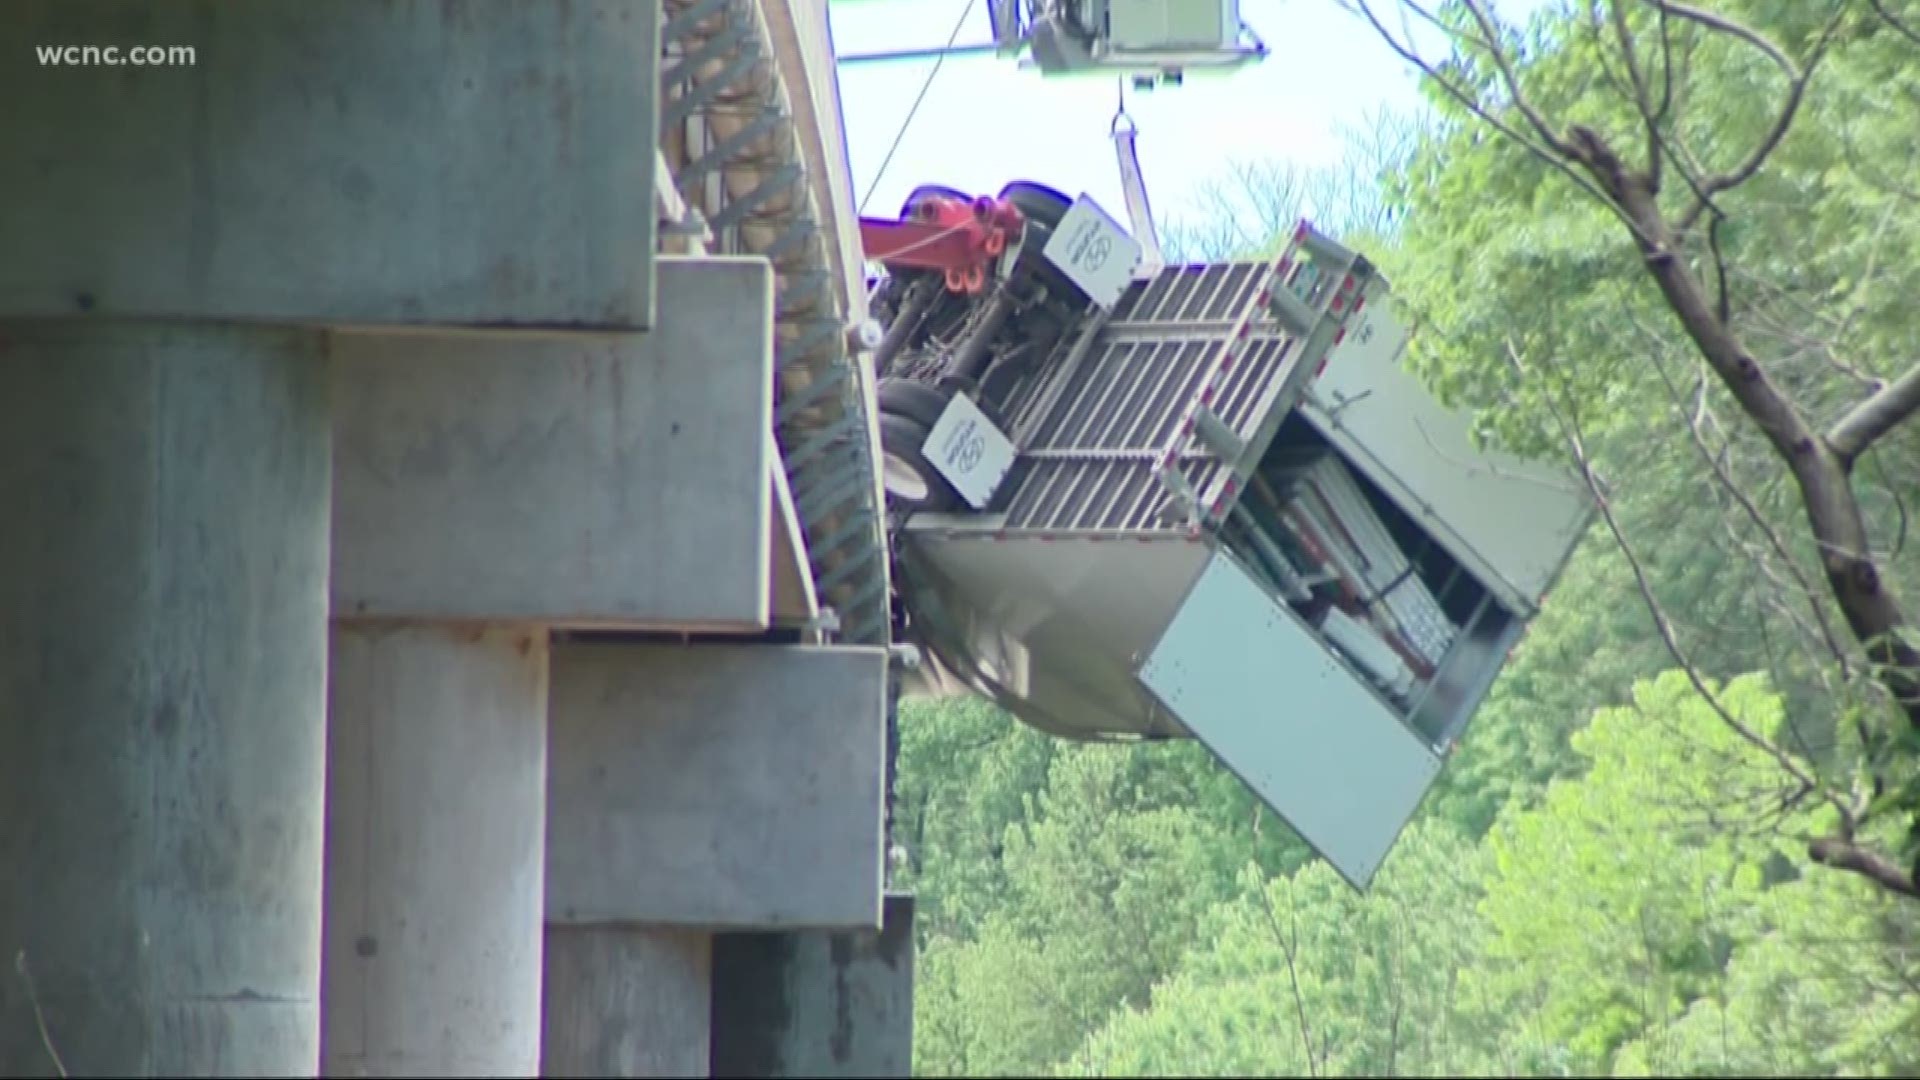 A tractor-trailer overturned late Sunday afternoon on the Southbound side of I-85 at the Yadkin River Bridge. Salisbury Fire tweeted the tractor-trailer was stabilized and the Hazmat team was off-loading the fuel.